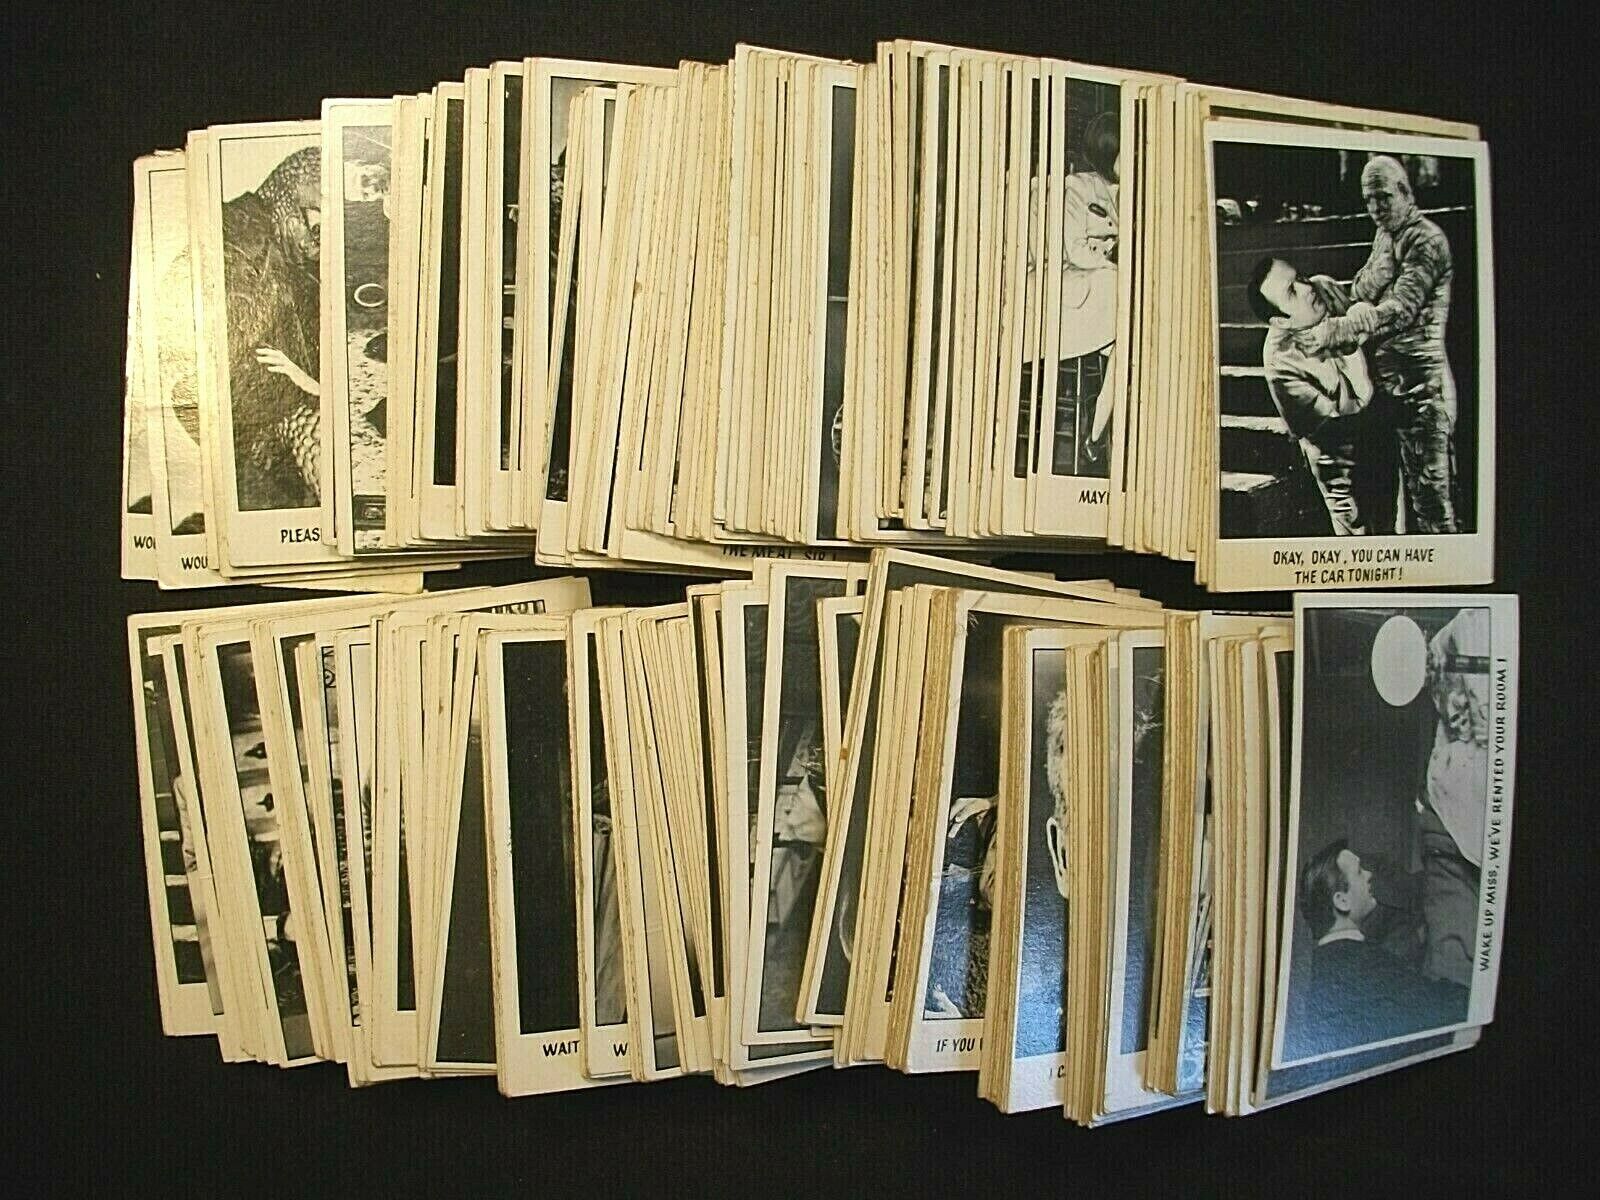 1973 Topps Series 1 YOU'LL DIE LAUGHING cards QUANTITY READ DESCRIPTION FOR LIST